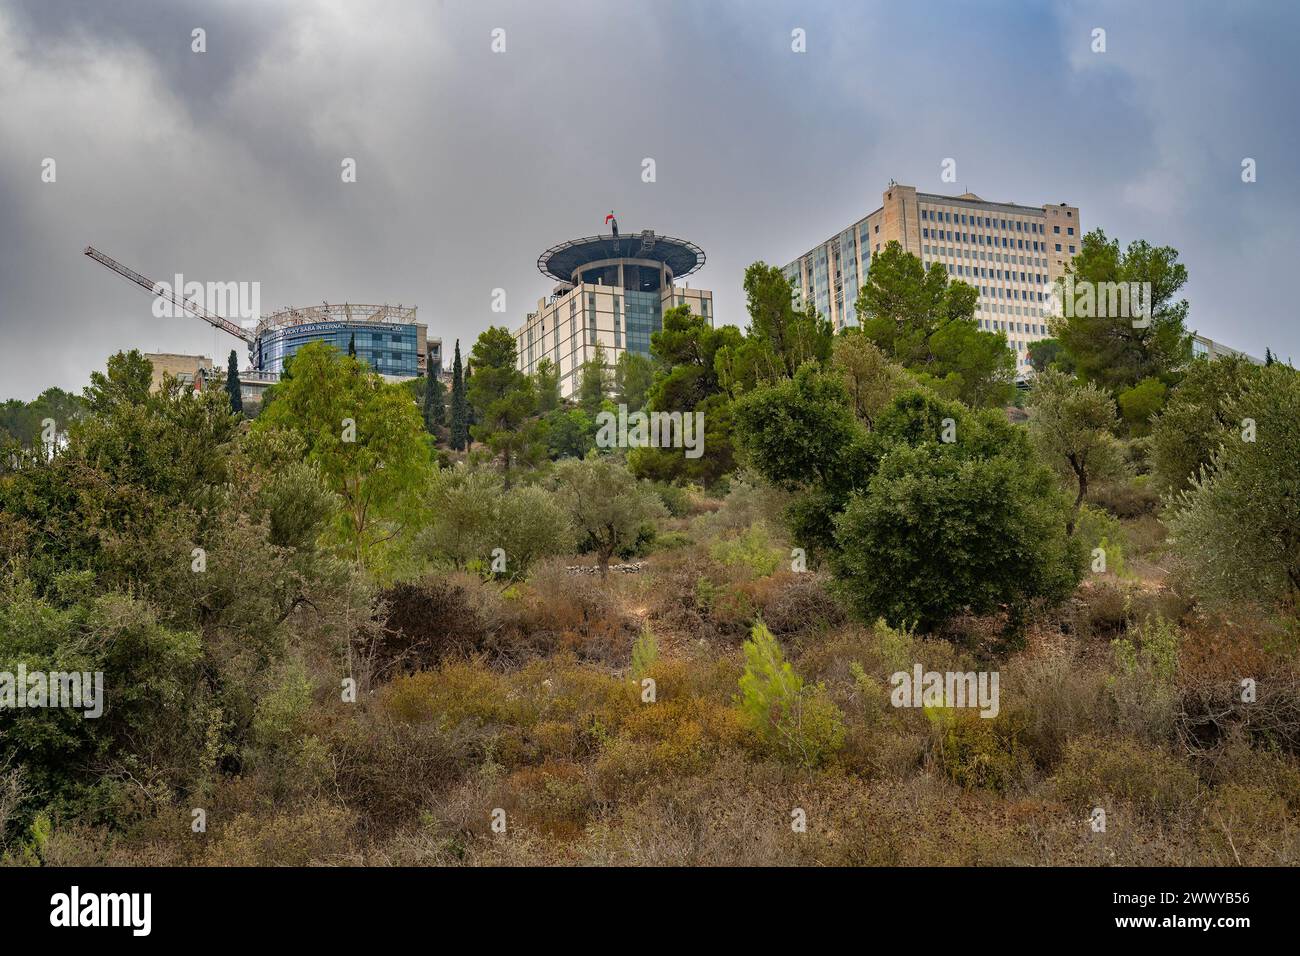 Hadassah hospital, on a hilltop just outside of Jerusalem, Israel, surrounded by a mediterranean forest with pine, oak and olive trees. Stock Photo